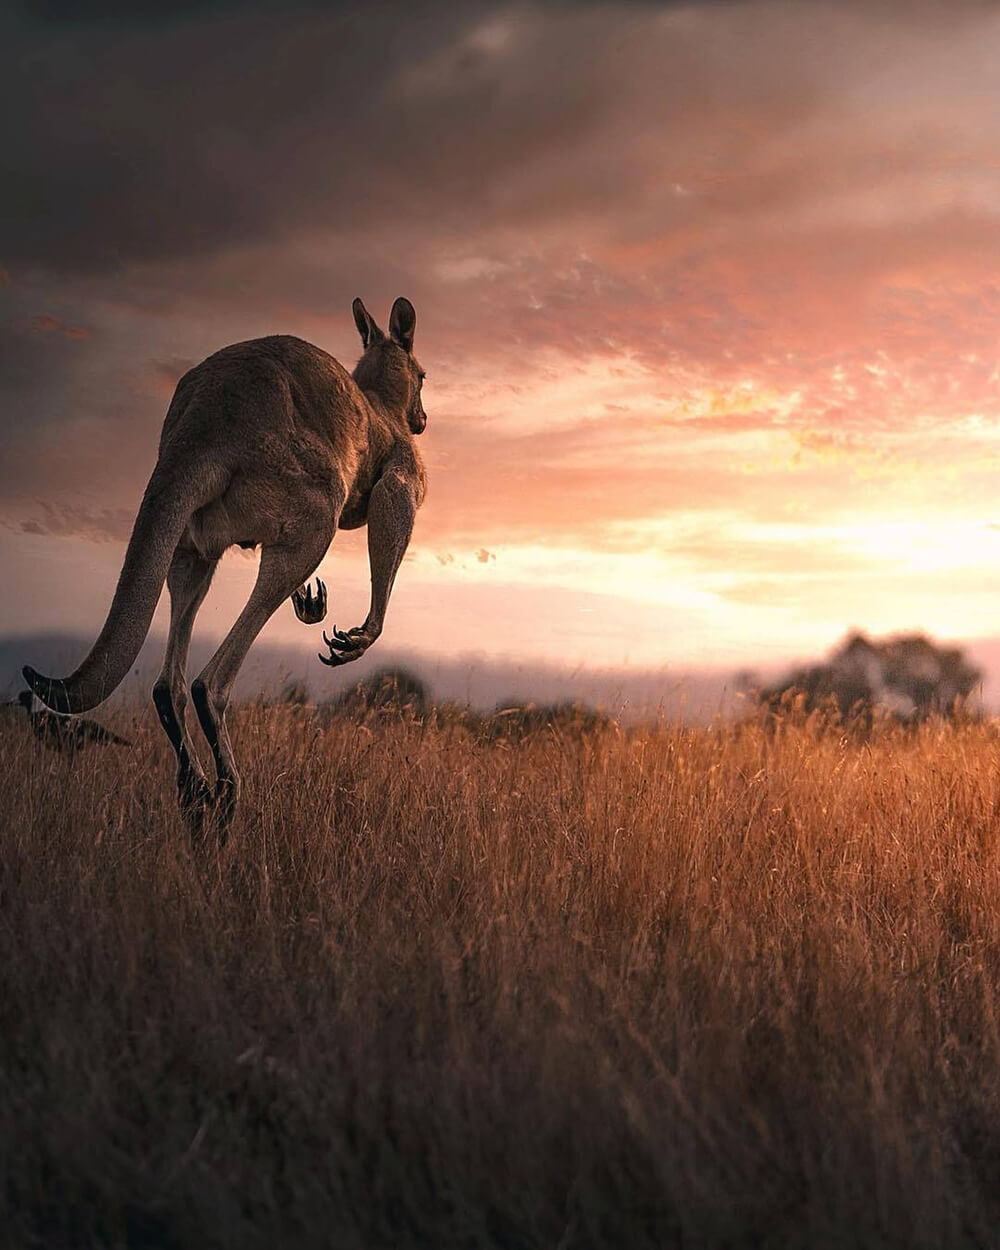 Image of kangaroo by @photo_shots_scapes